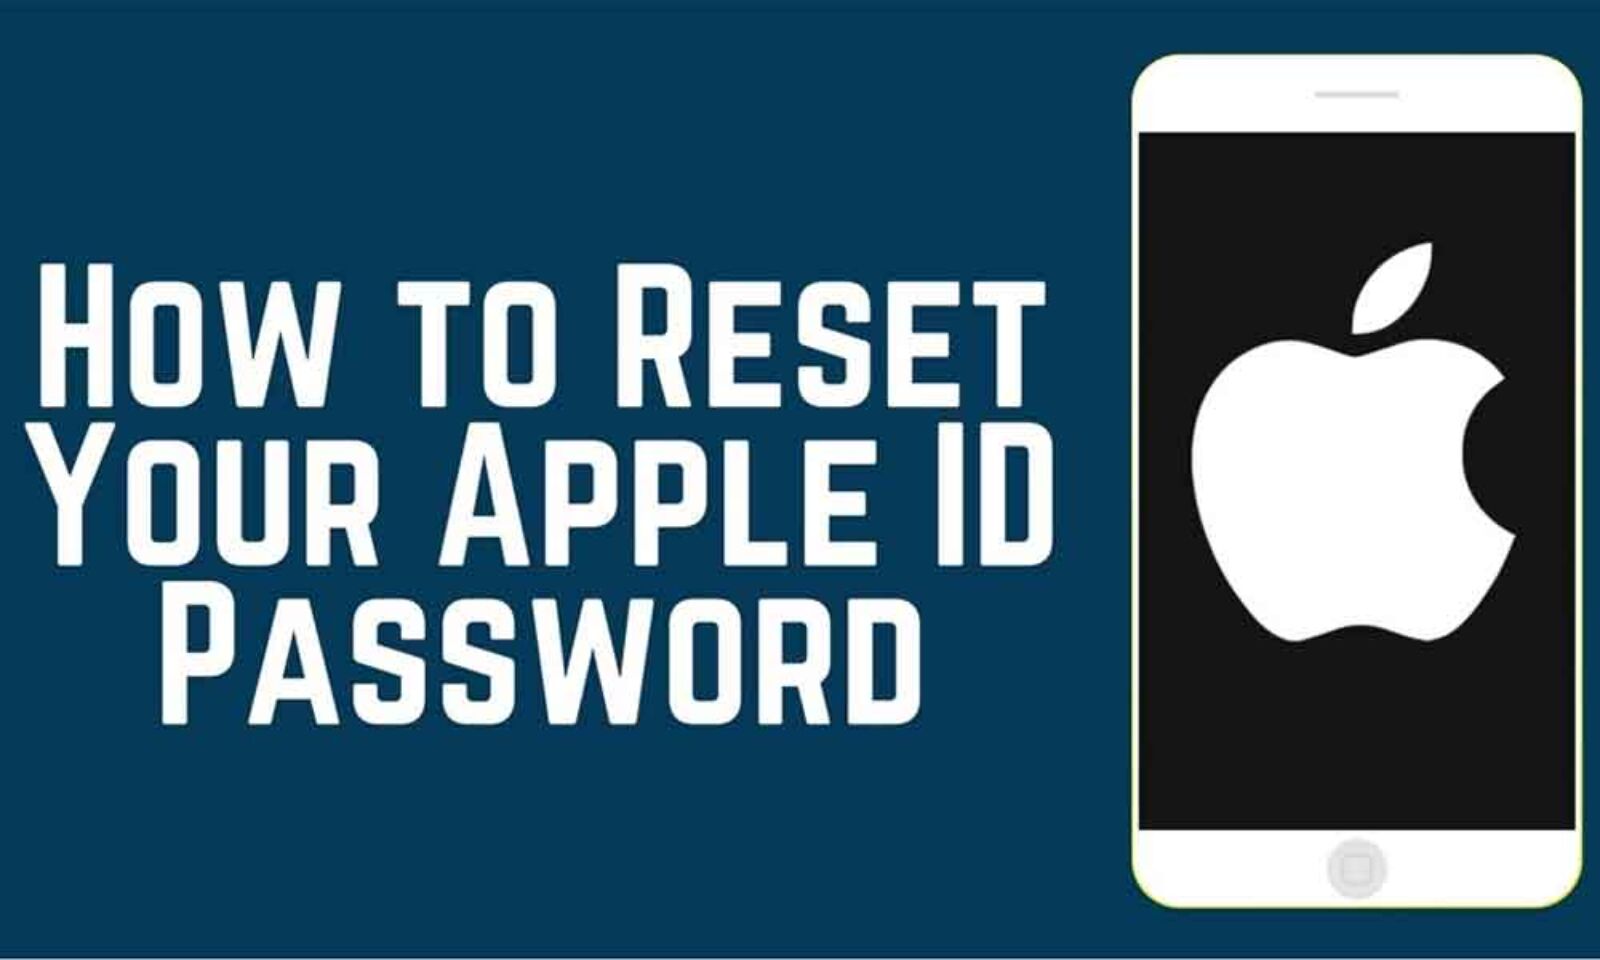 Forgot your Apple ID password? Your friend or family member can